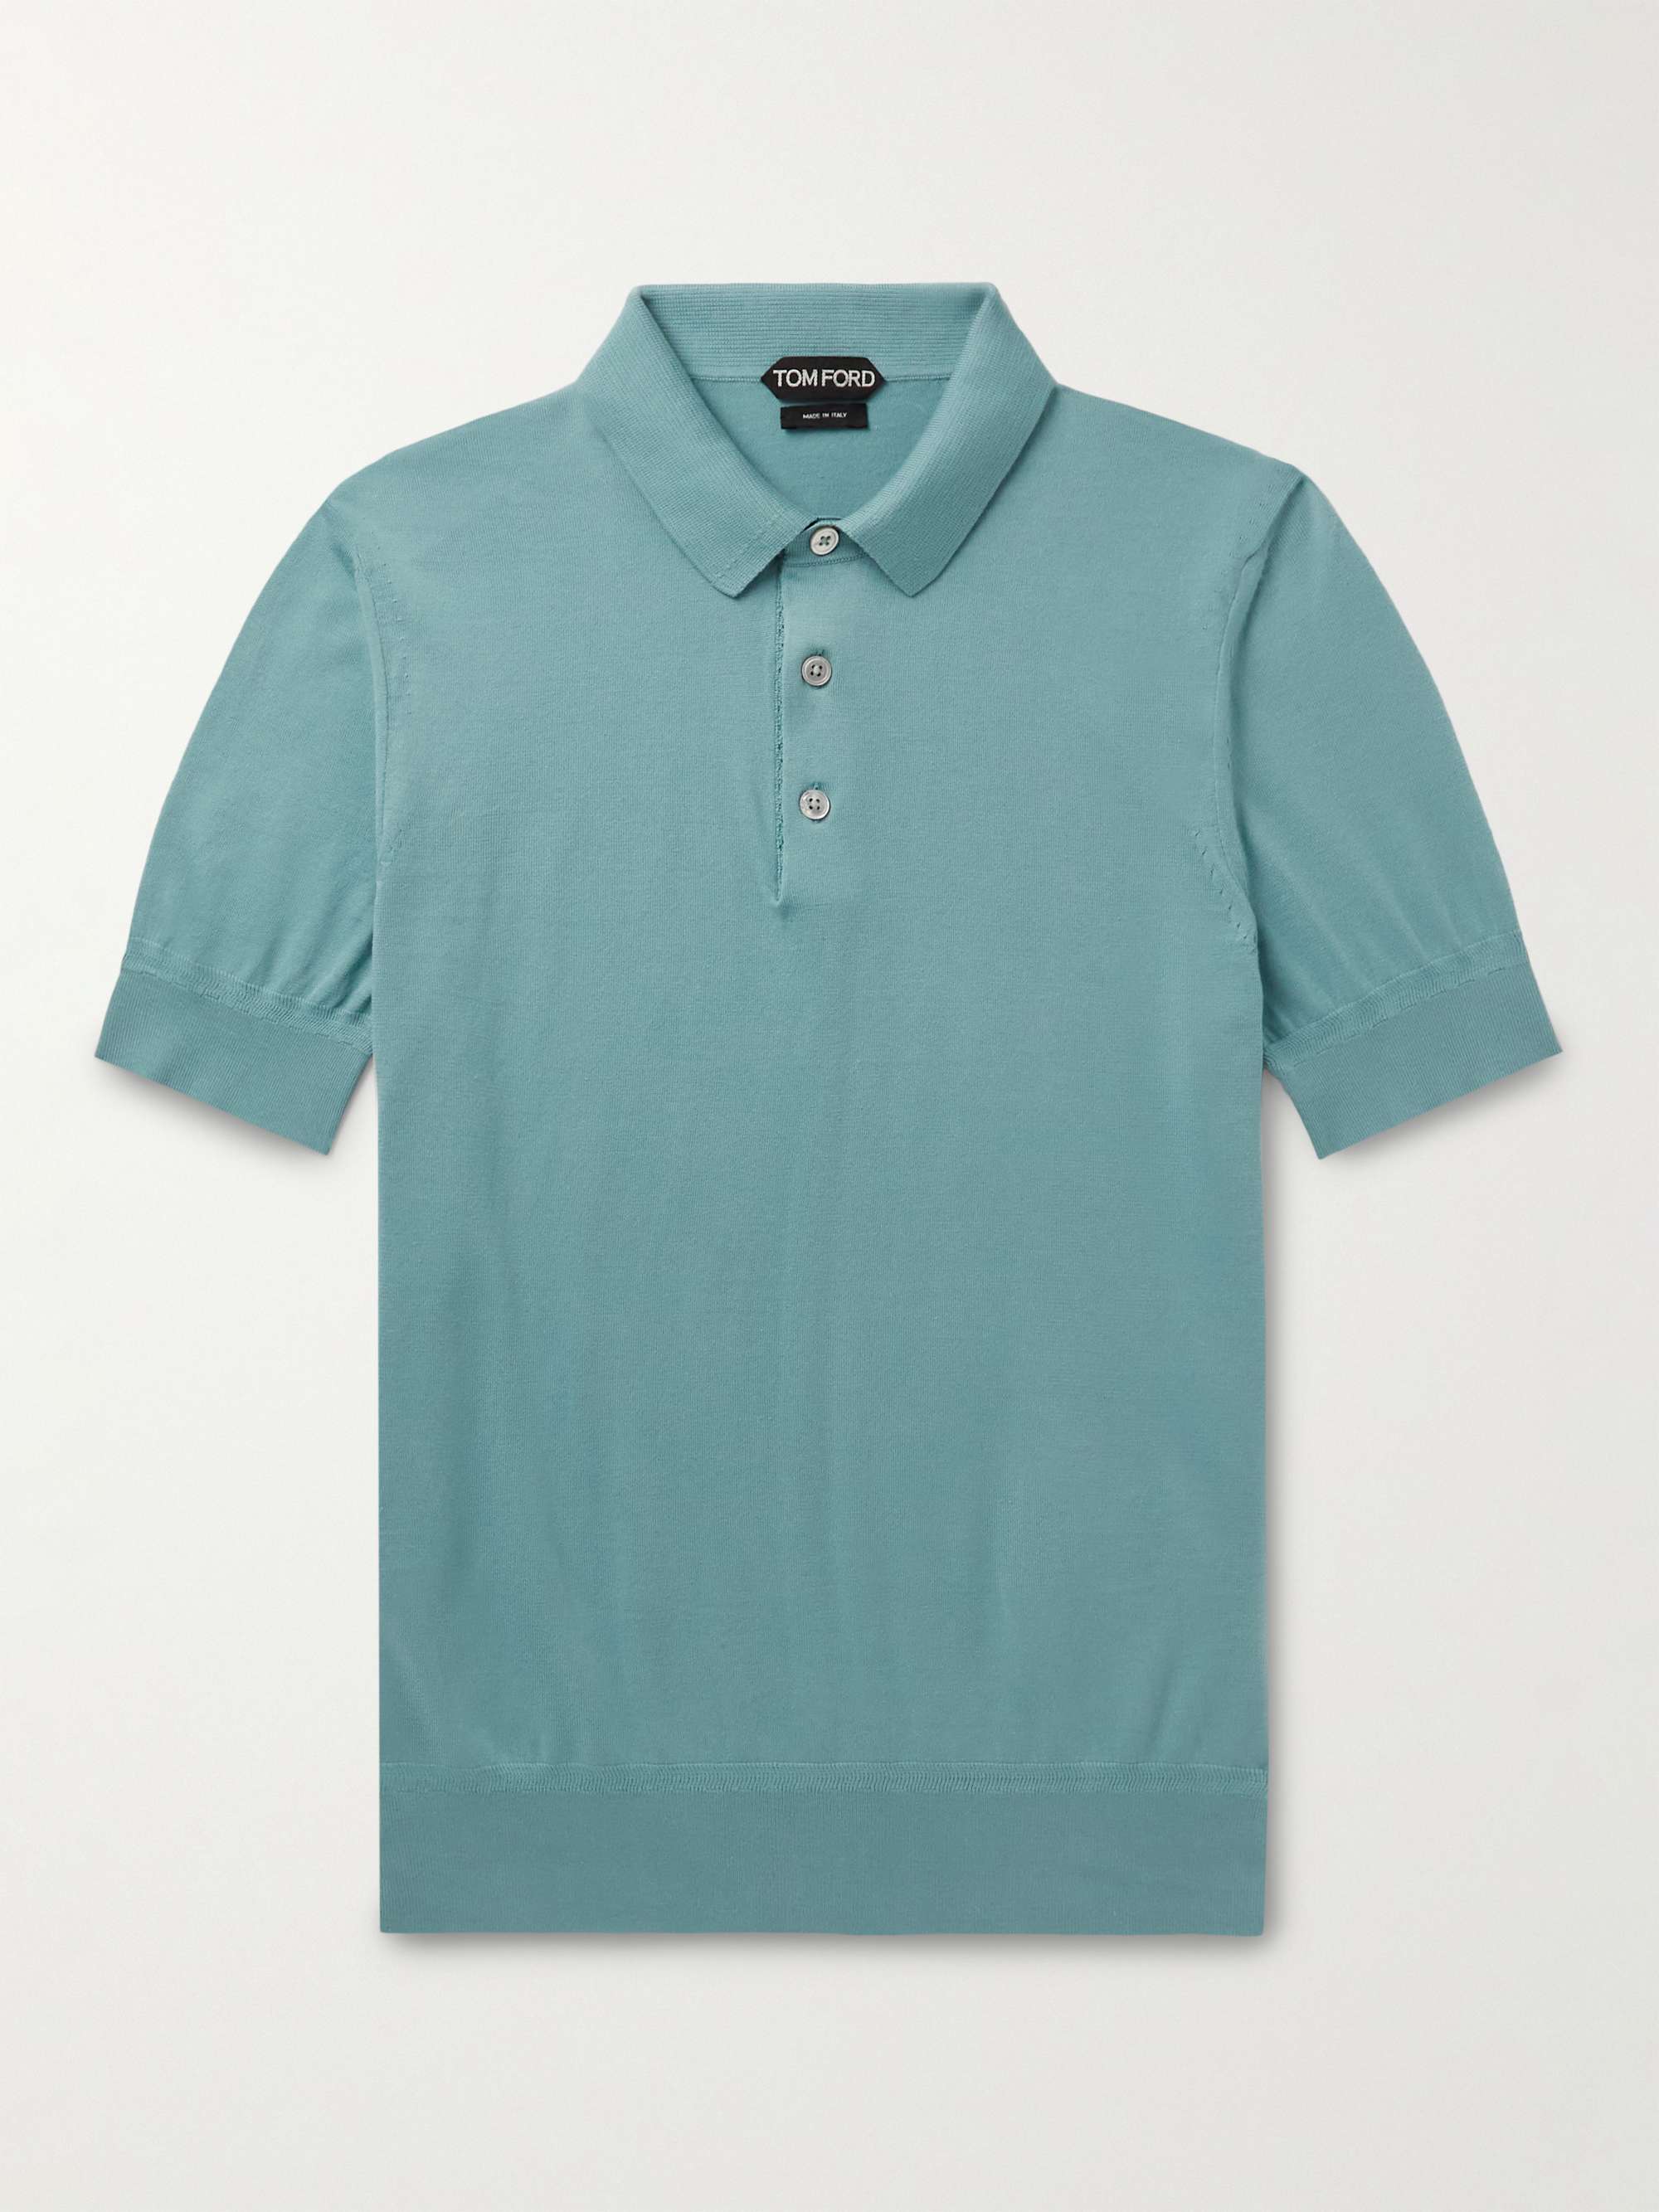 TOM FORD Slim-Fit Cashmere and Silk-Blend Polo Shirt